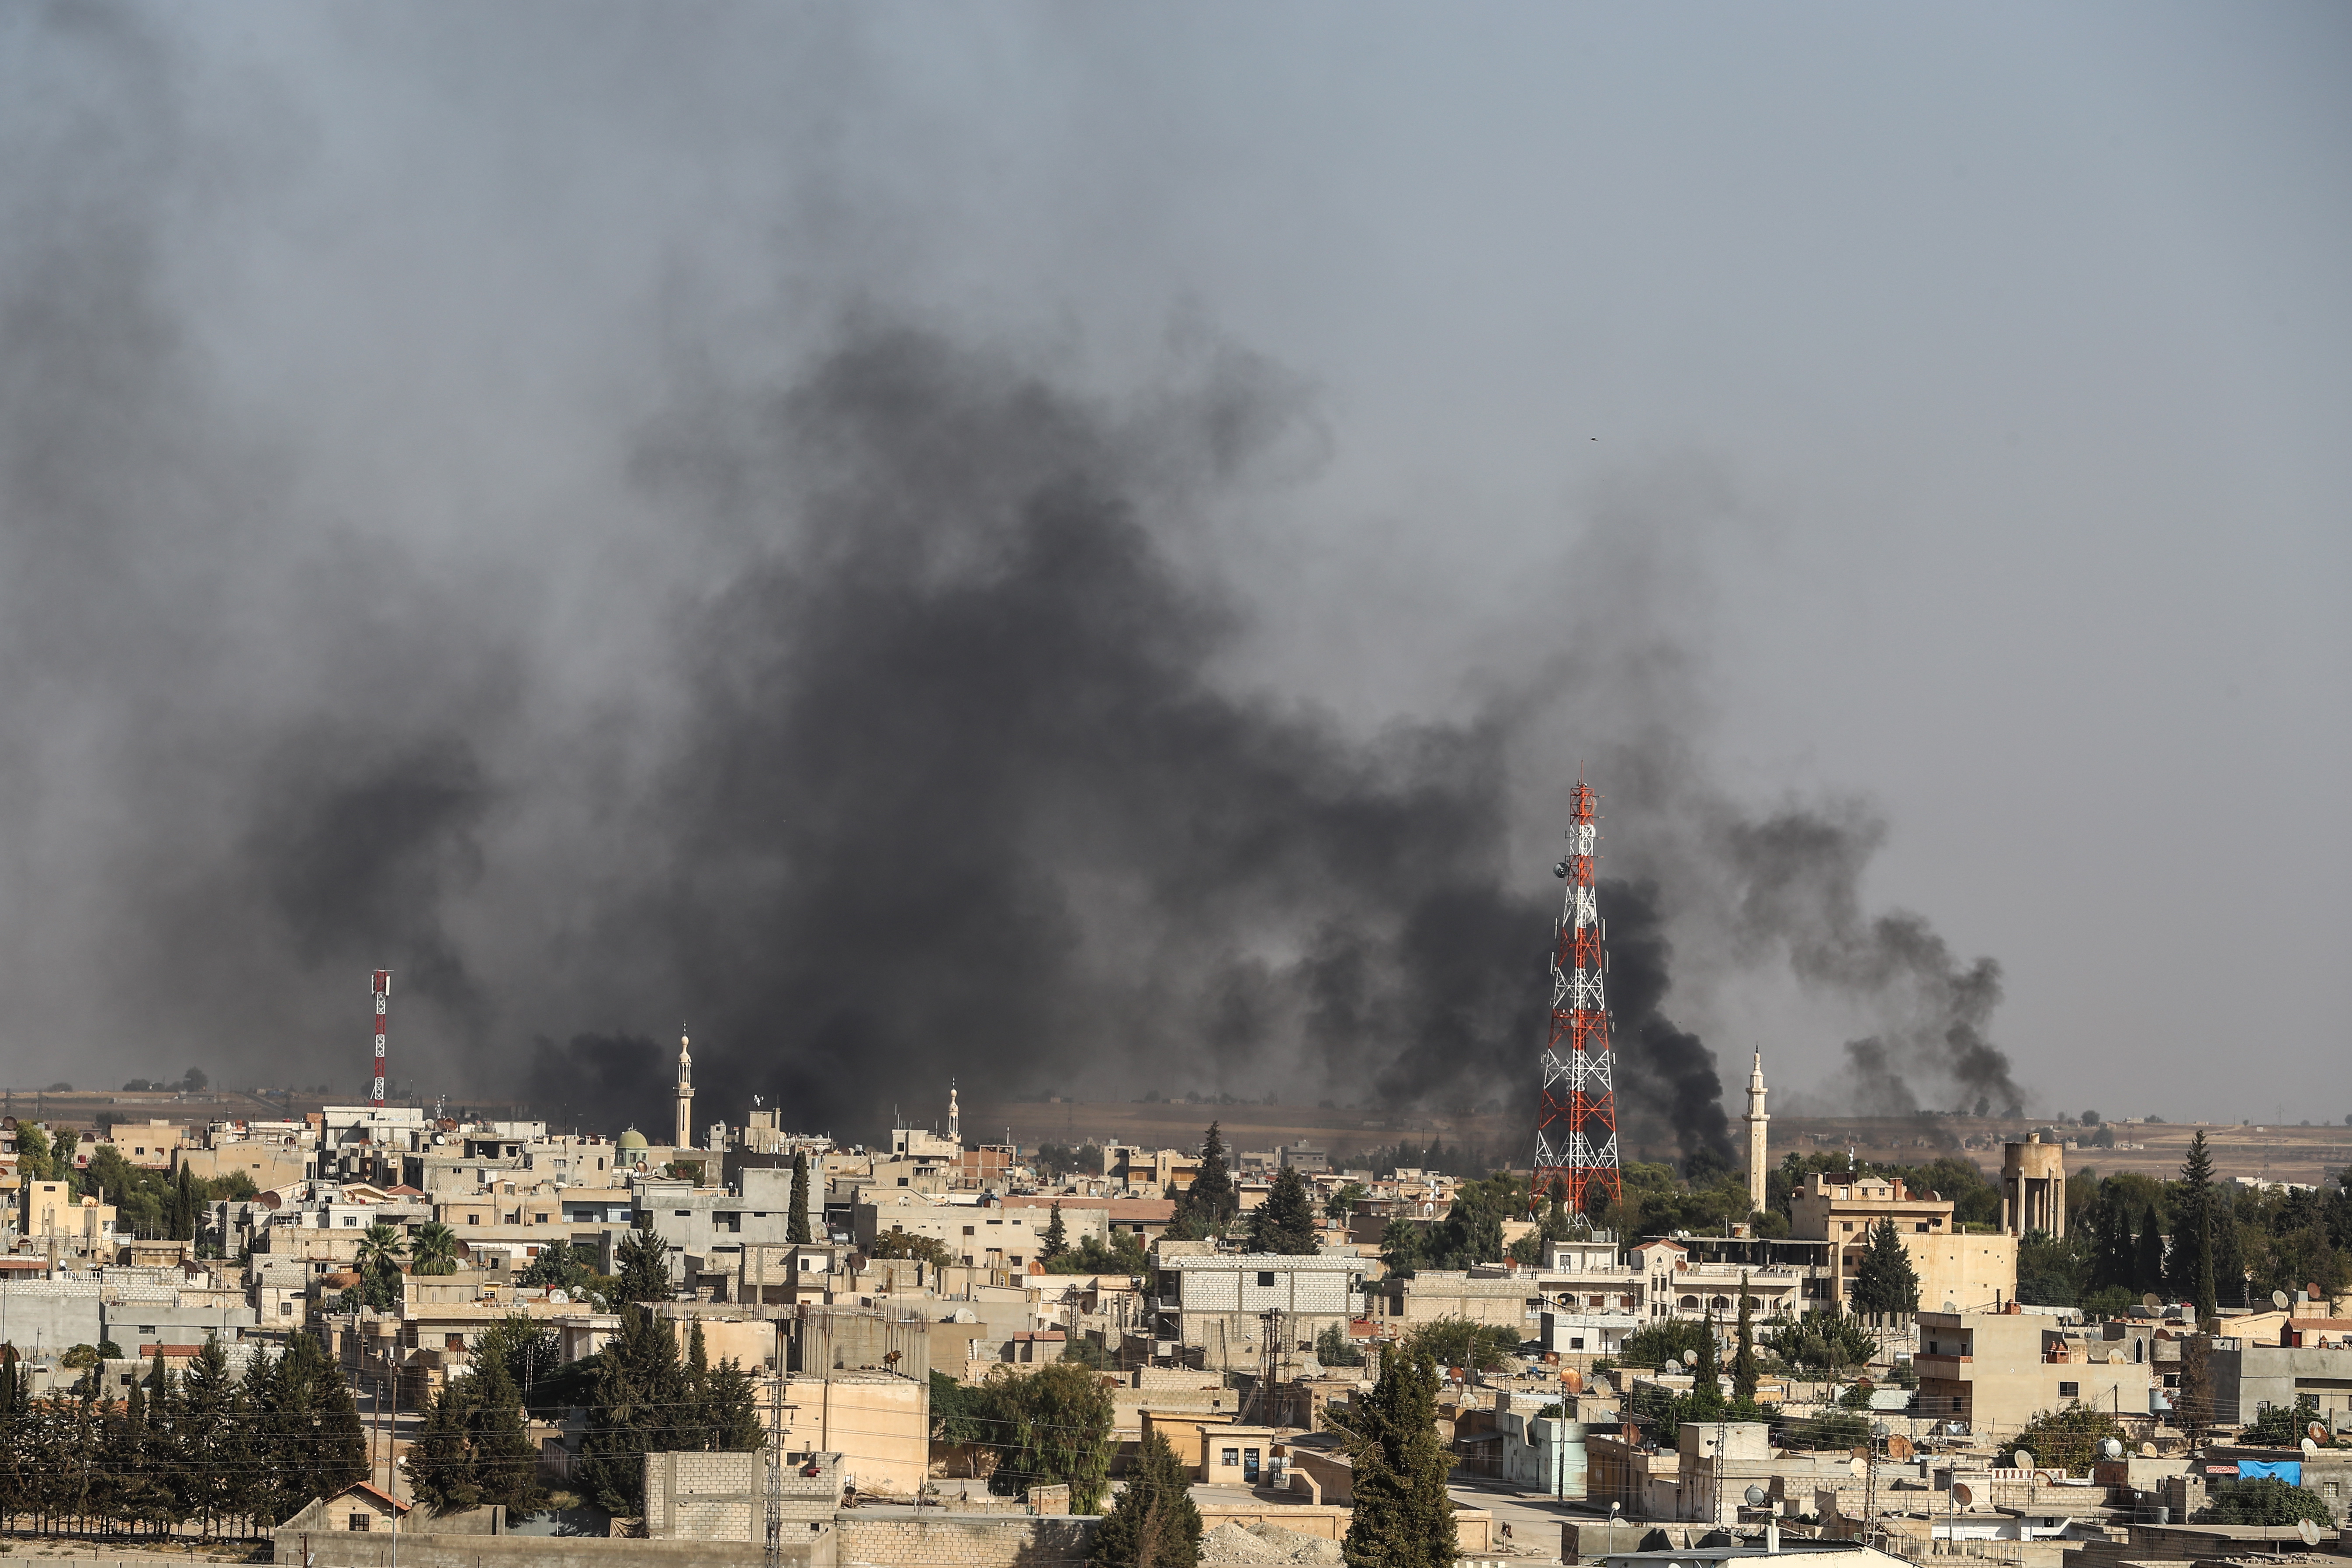 epa07910278 A picture taken from Turkish territory shows smoke rising from targets inside Syria during bombardment by Turkish forces at Ras al-Ein town, in Ceylanpinar, in Sanliurfa, Turkey 10 October 2019. Turkey has launched an offensive targeting Kurdish forces in north-eastern Syria, days after the US withdrew troops from the area.  EPA/SEDAT SUNA